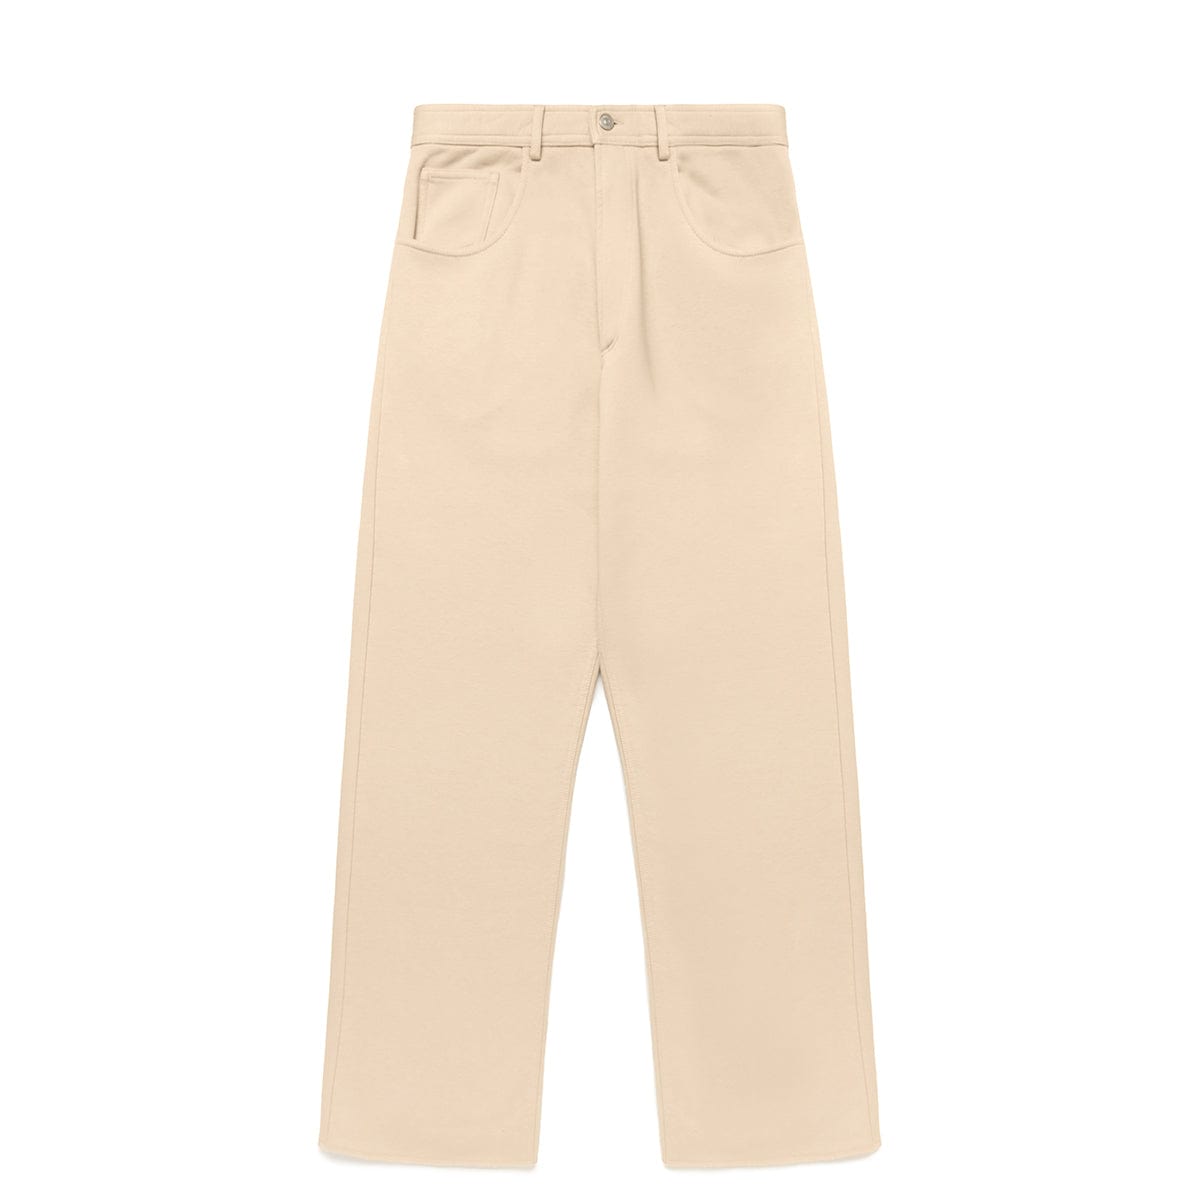 WOMEN'S TROUSERS Slim BEIGE  TRACK PANTS WITH CLASSIC DETAILS AND